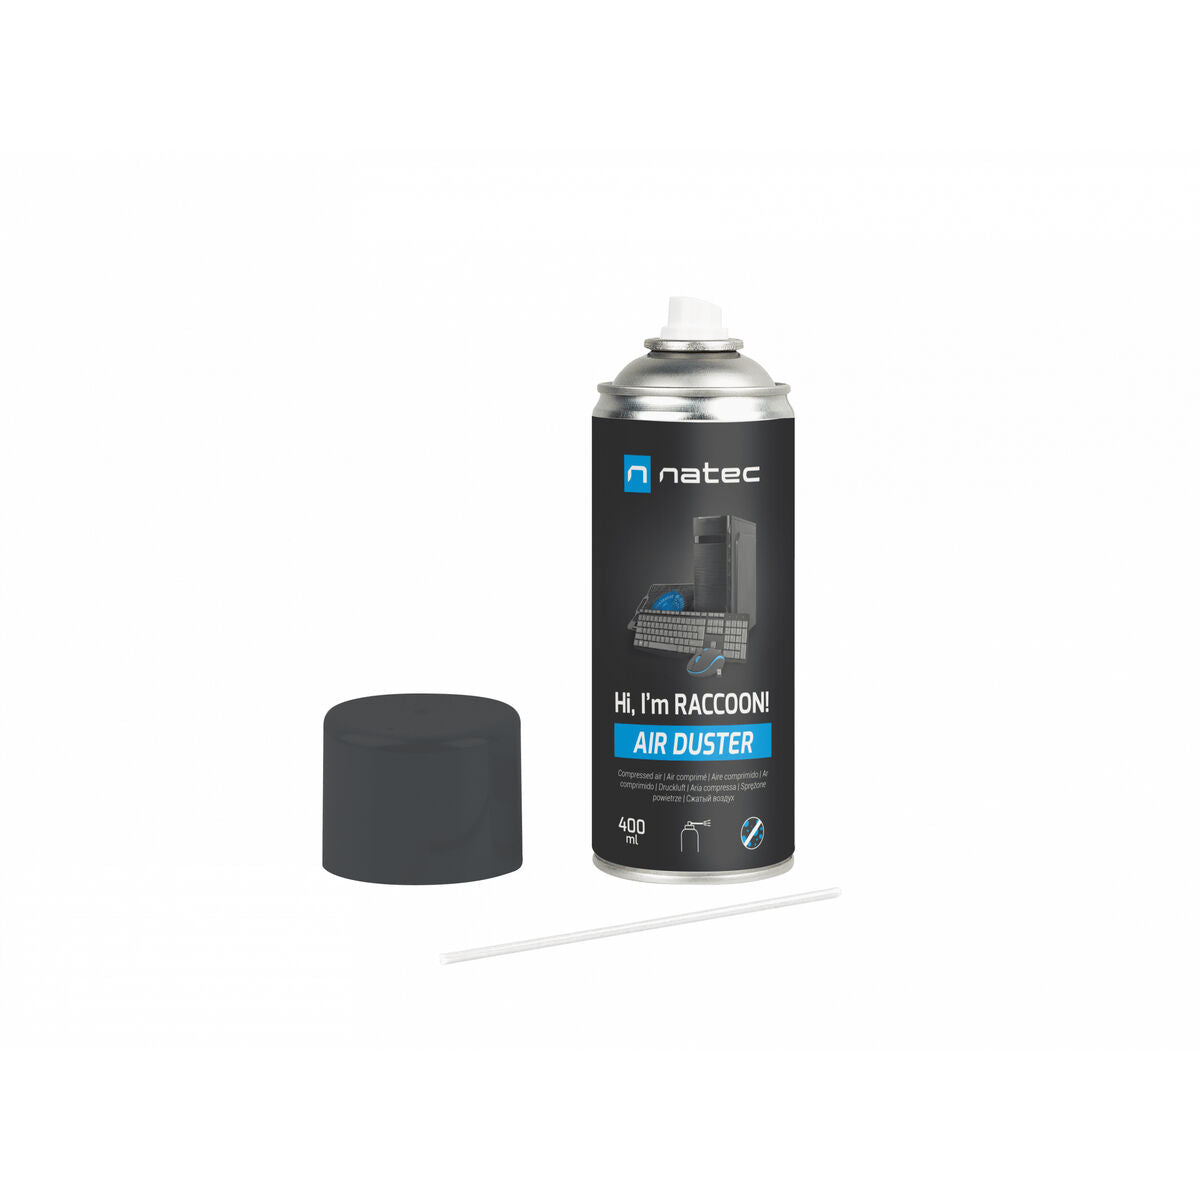 Compressed Air Natec NSC-2119 400 ml, Natec, Electronics, Photography and video cameras, compressed-air-natec-nsc-2119-400-ml, Brand_Natec, category-reference-2609, category-reference-2932, category-reference-2936, category-reference-t-19653, category-reference-t-8122, category-reference-t-8123, category-reference-t-8285, category-reference-t-8286, Condition_NEW, fotografía, Price_20 - 50, travel, RiotNook